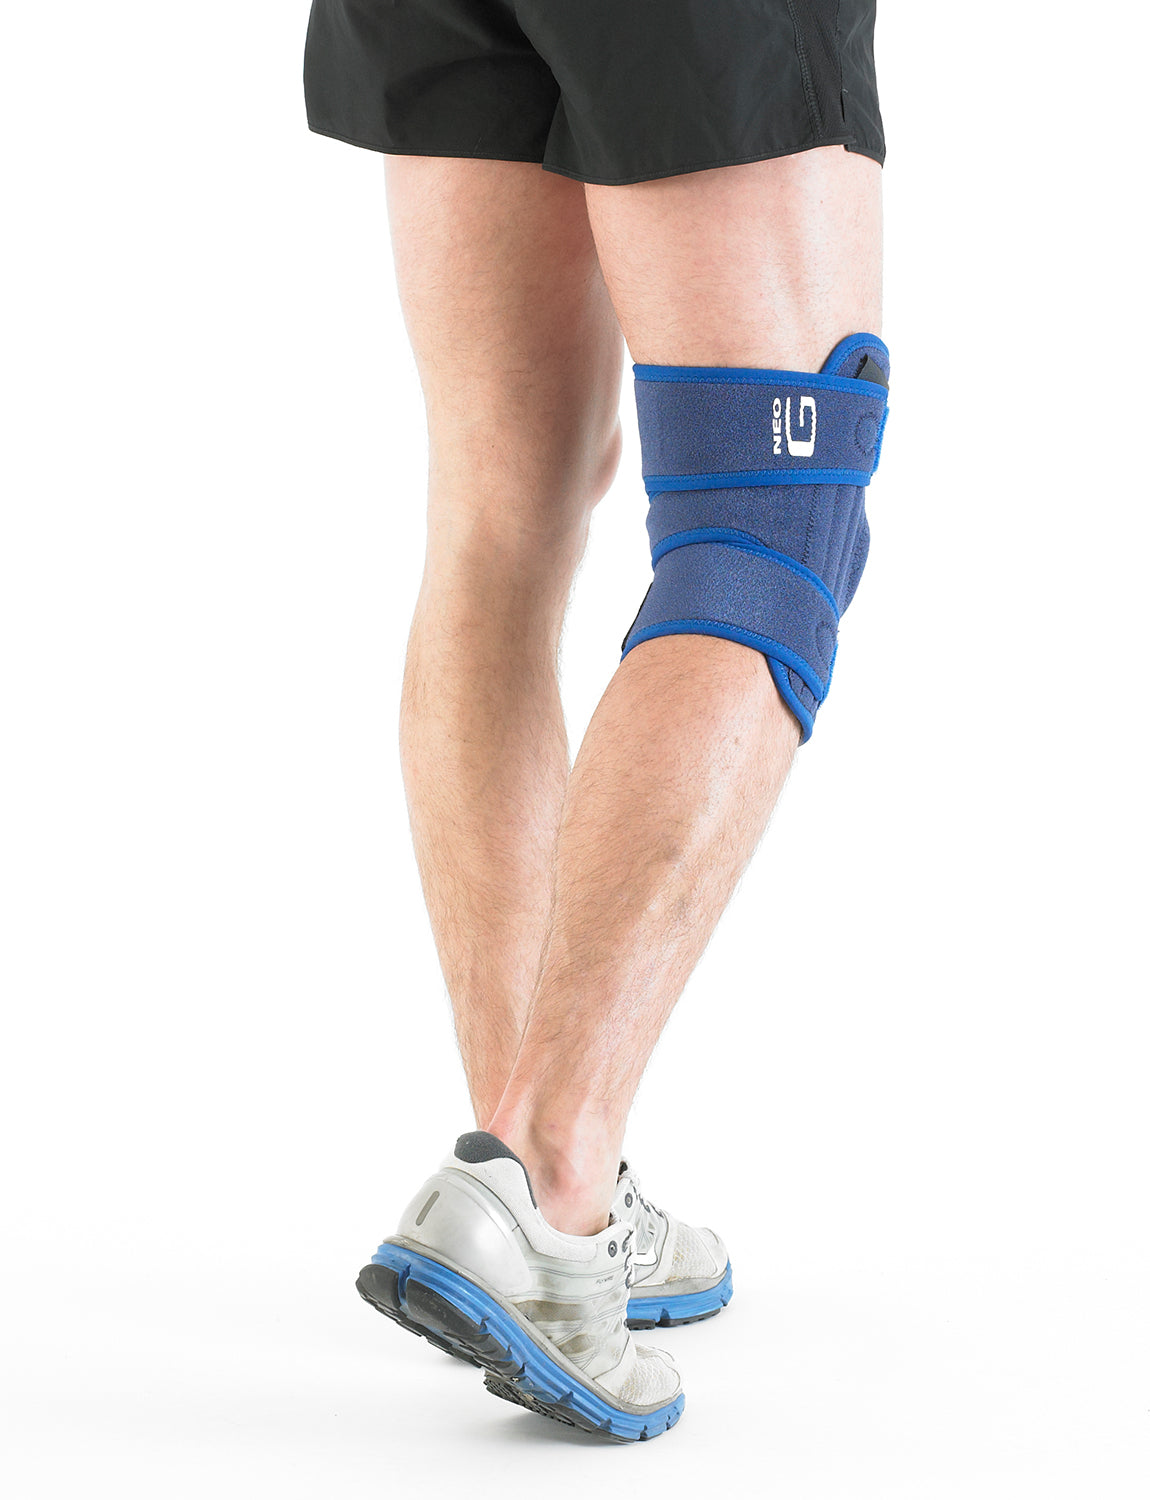 Stabilized Open Knee Support